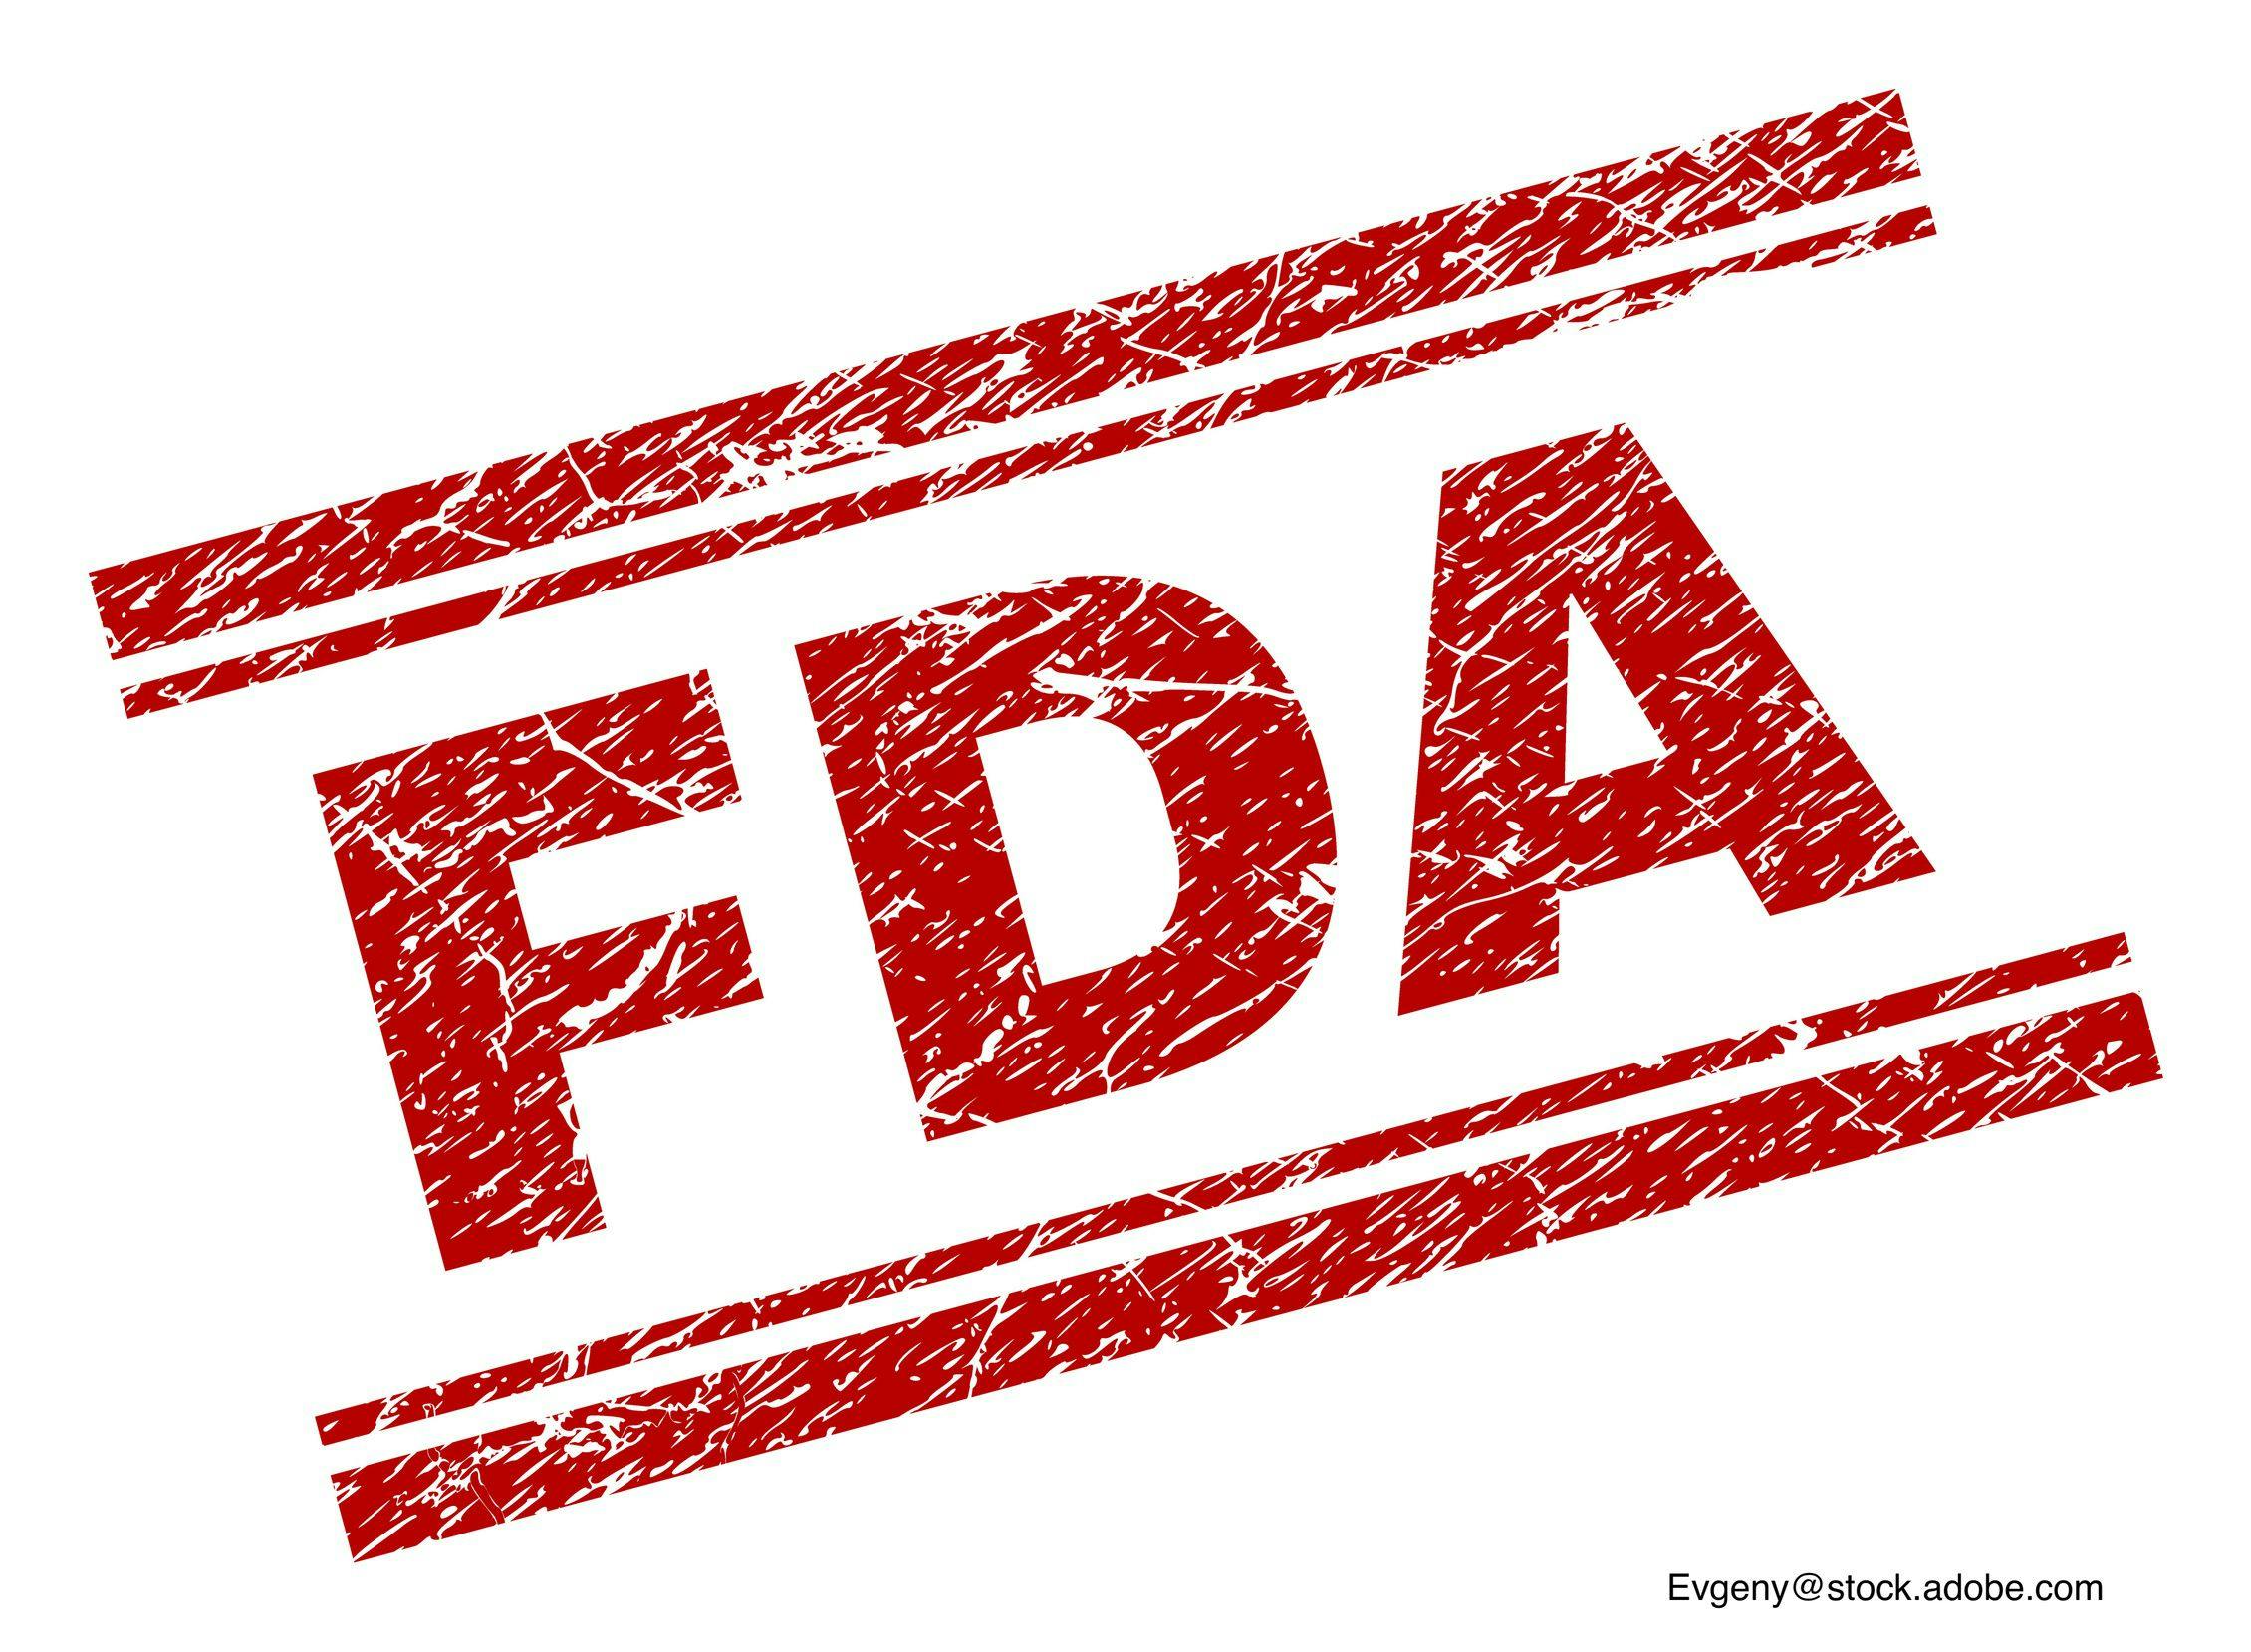 FDA Approves Dupilumab for Atopic Dermatitis in Children 6 Months to 5 Years